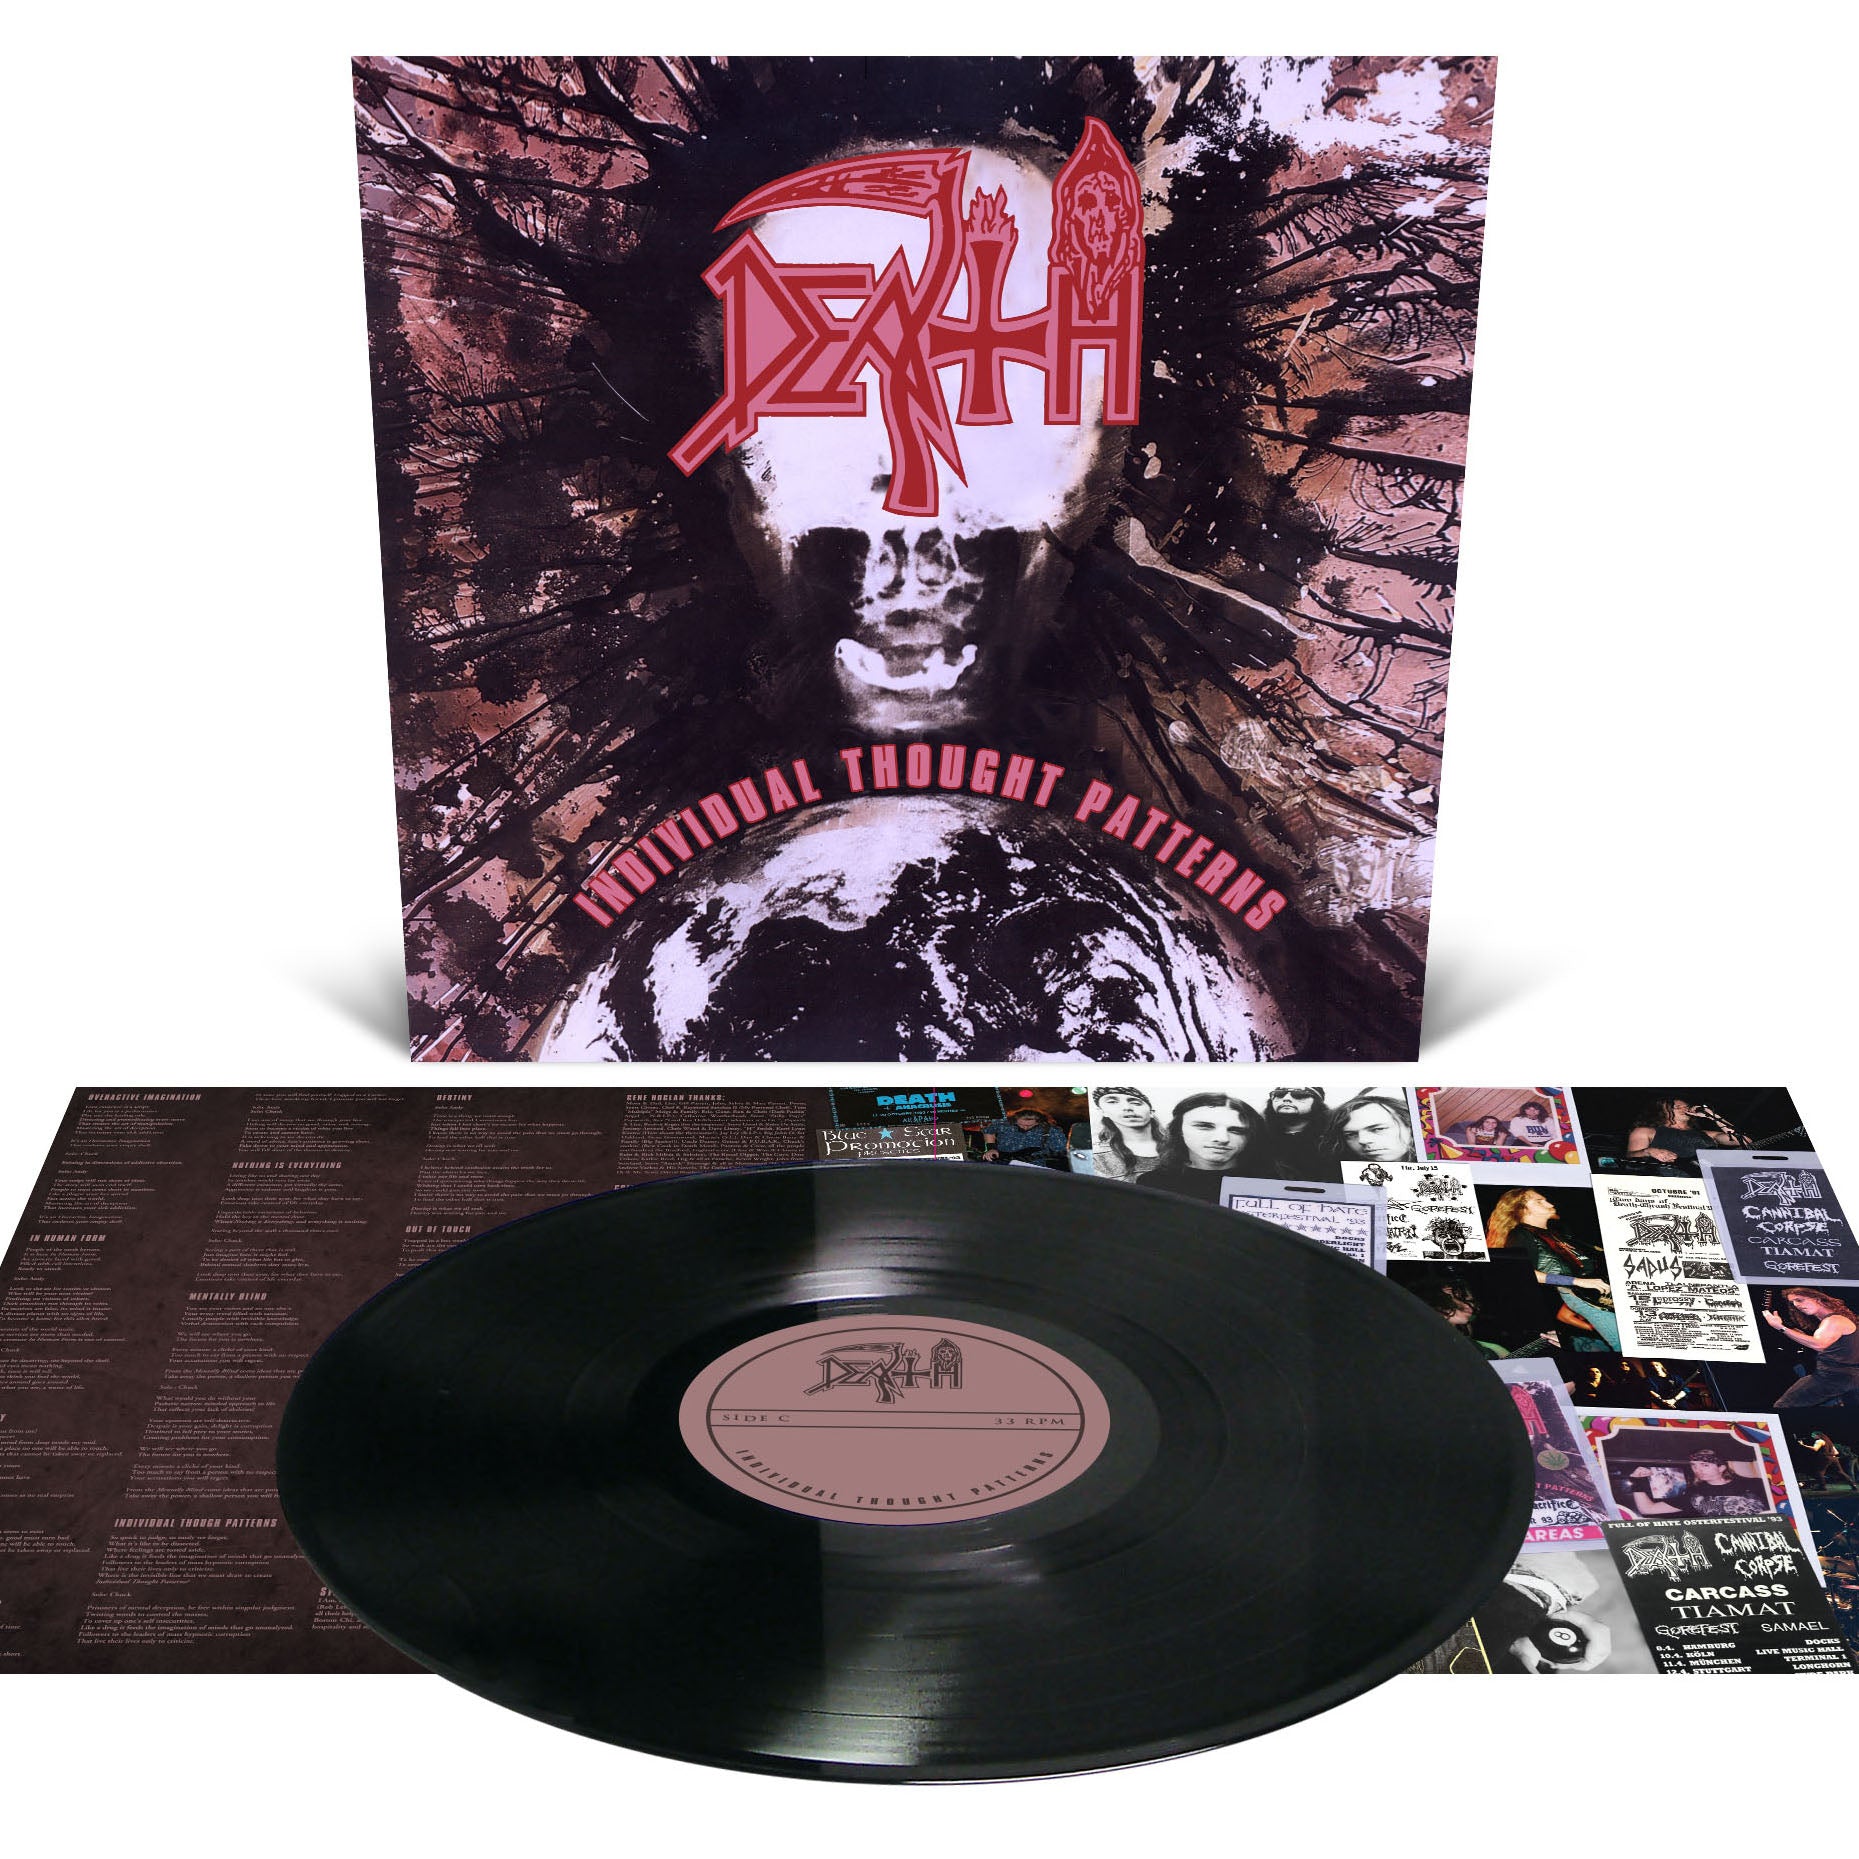 Death "Individual Thought Patterns" Black Vinyl